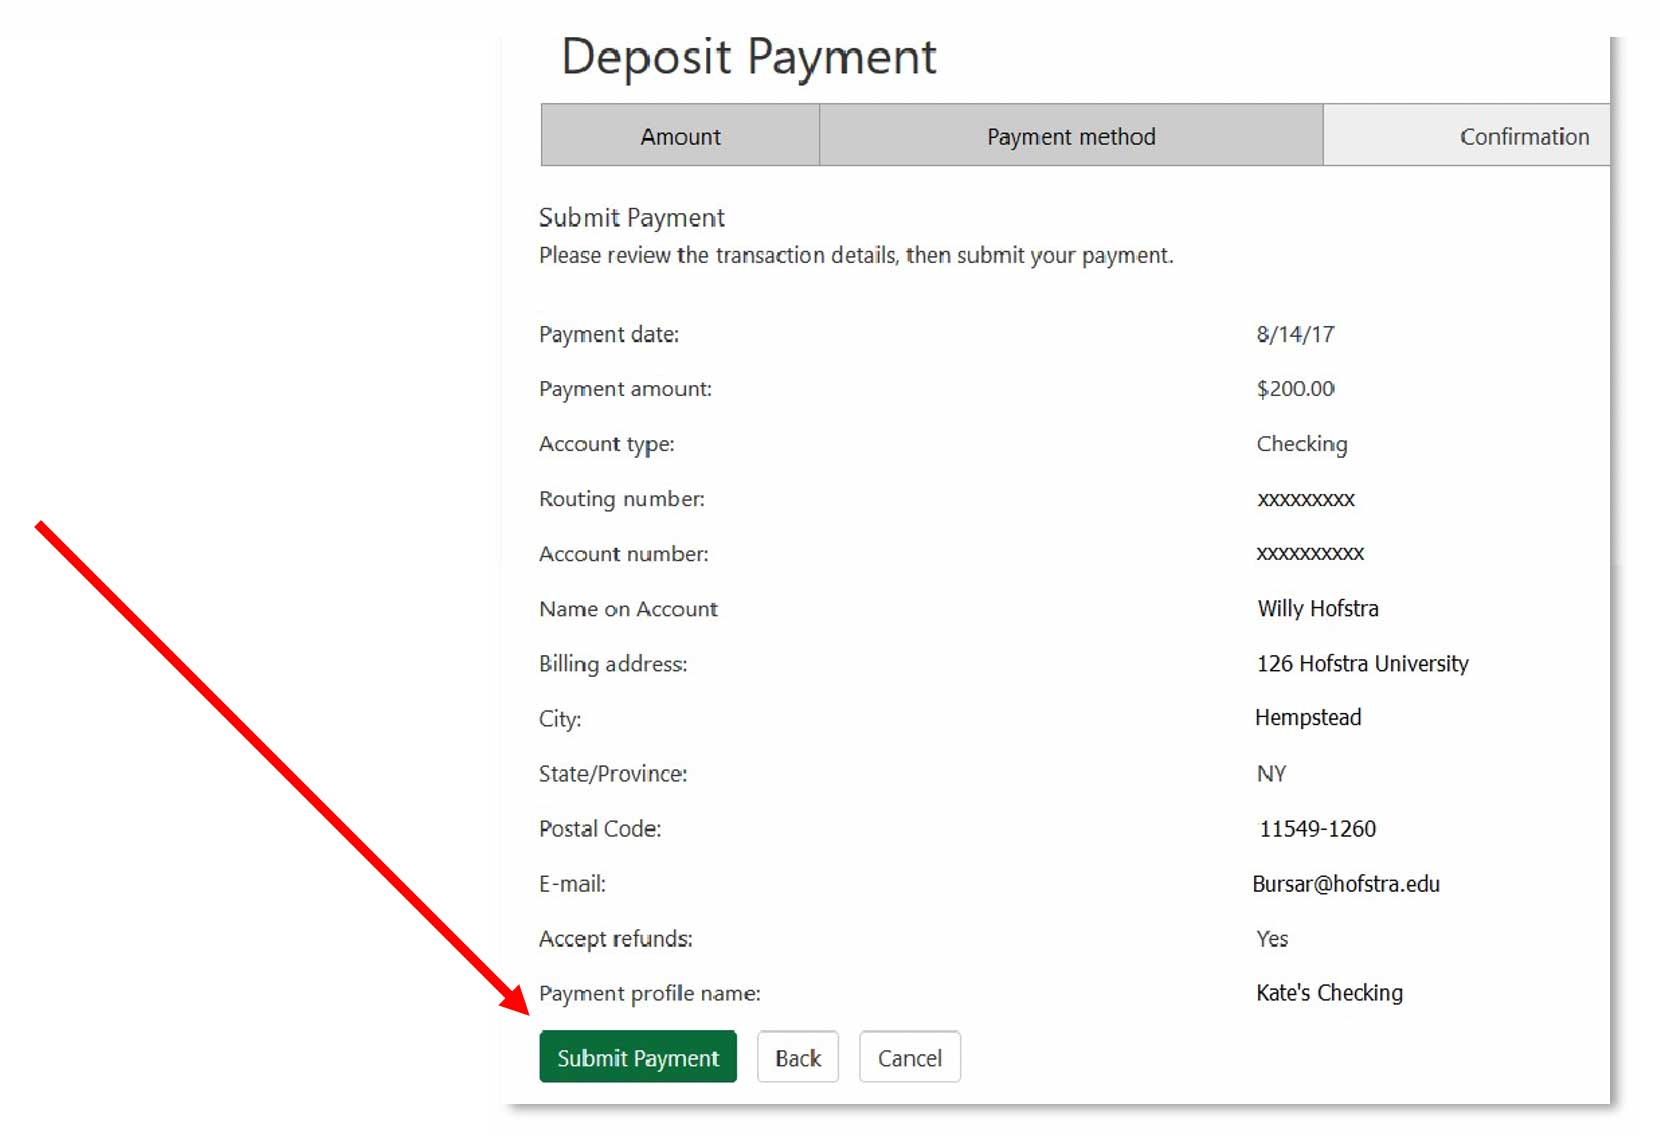 Review payment details, check the box to Agree and click Submit Payment to continue